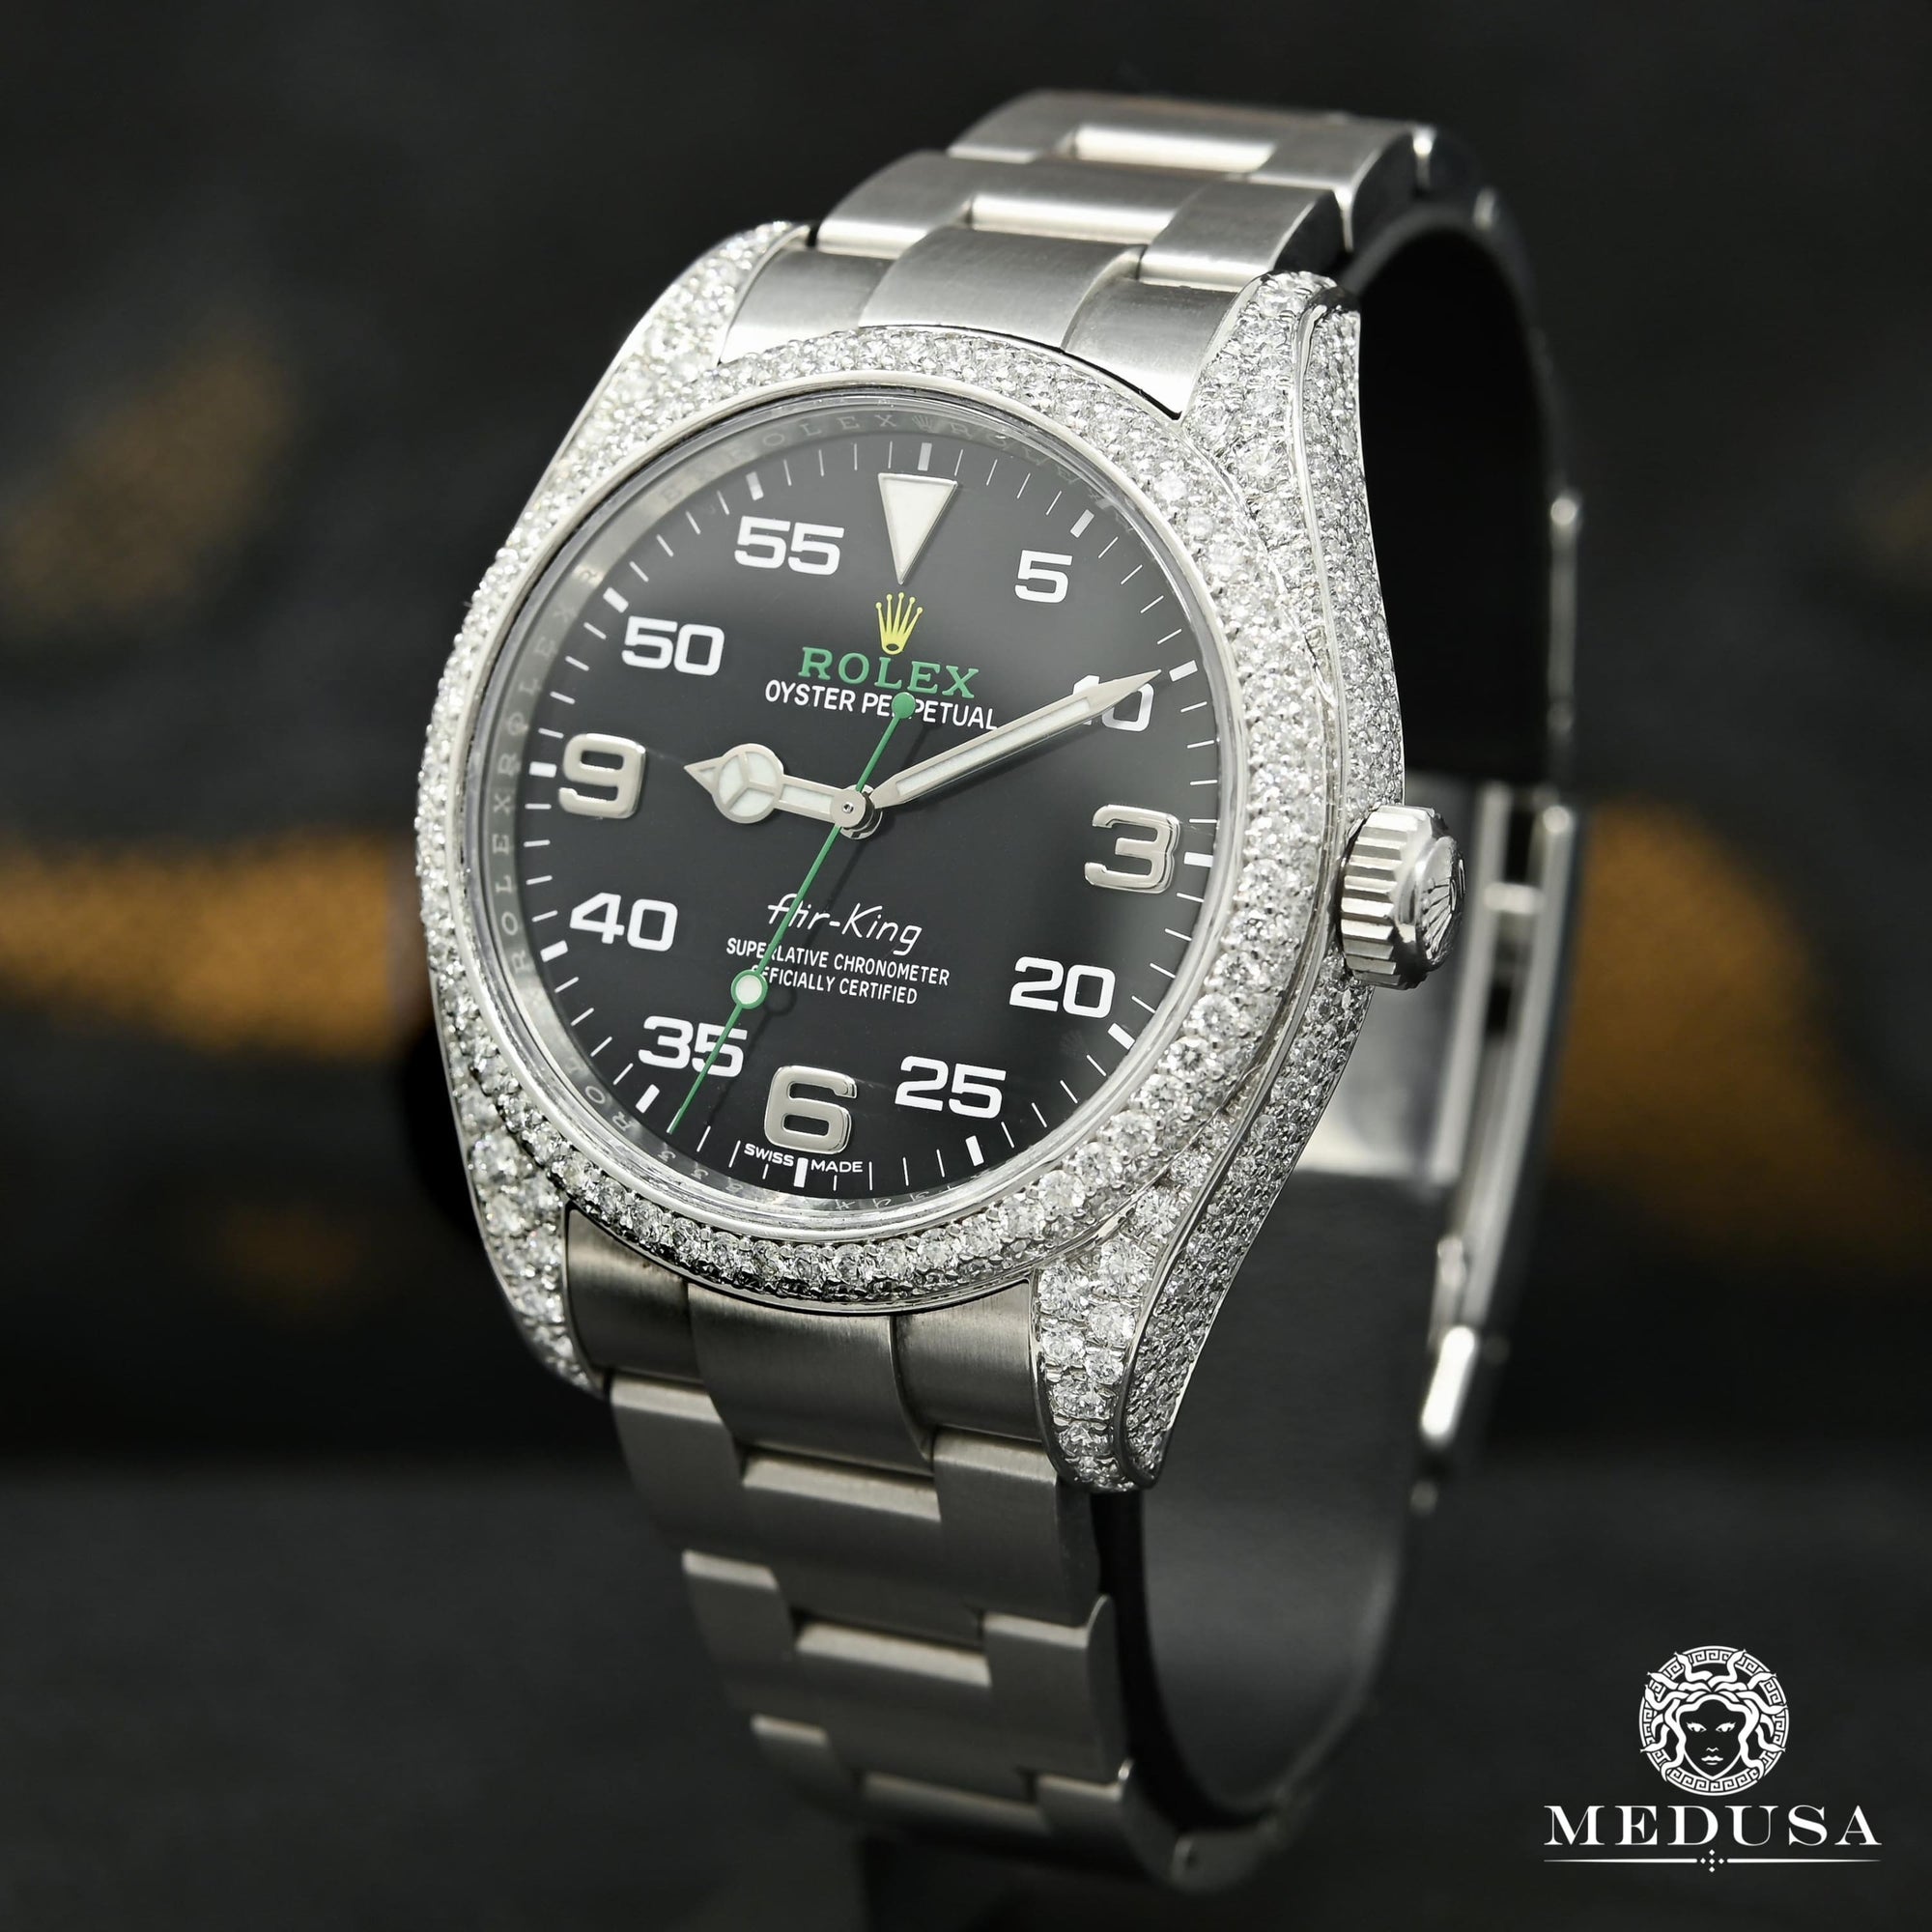 Montre Rolex | Homme Air-King 40mm - Honeycomb Case Stainless